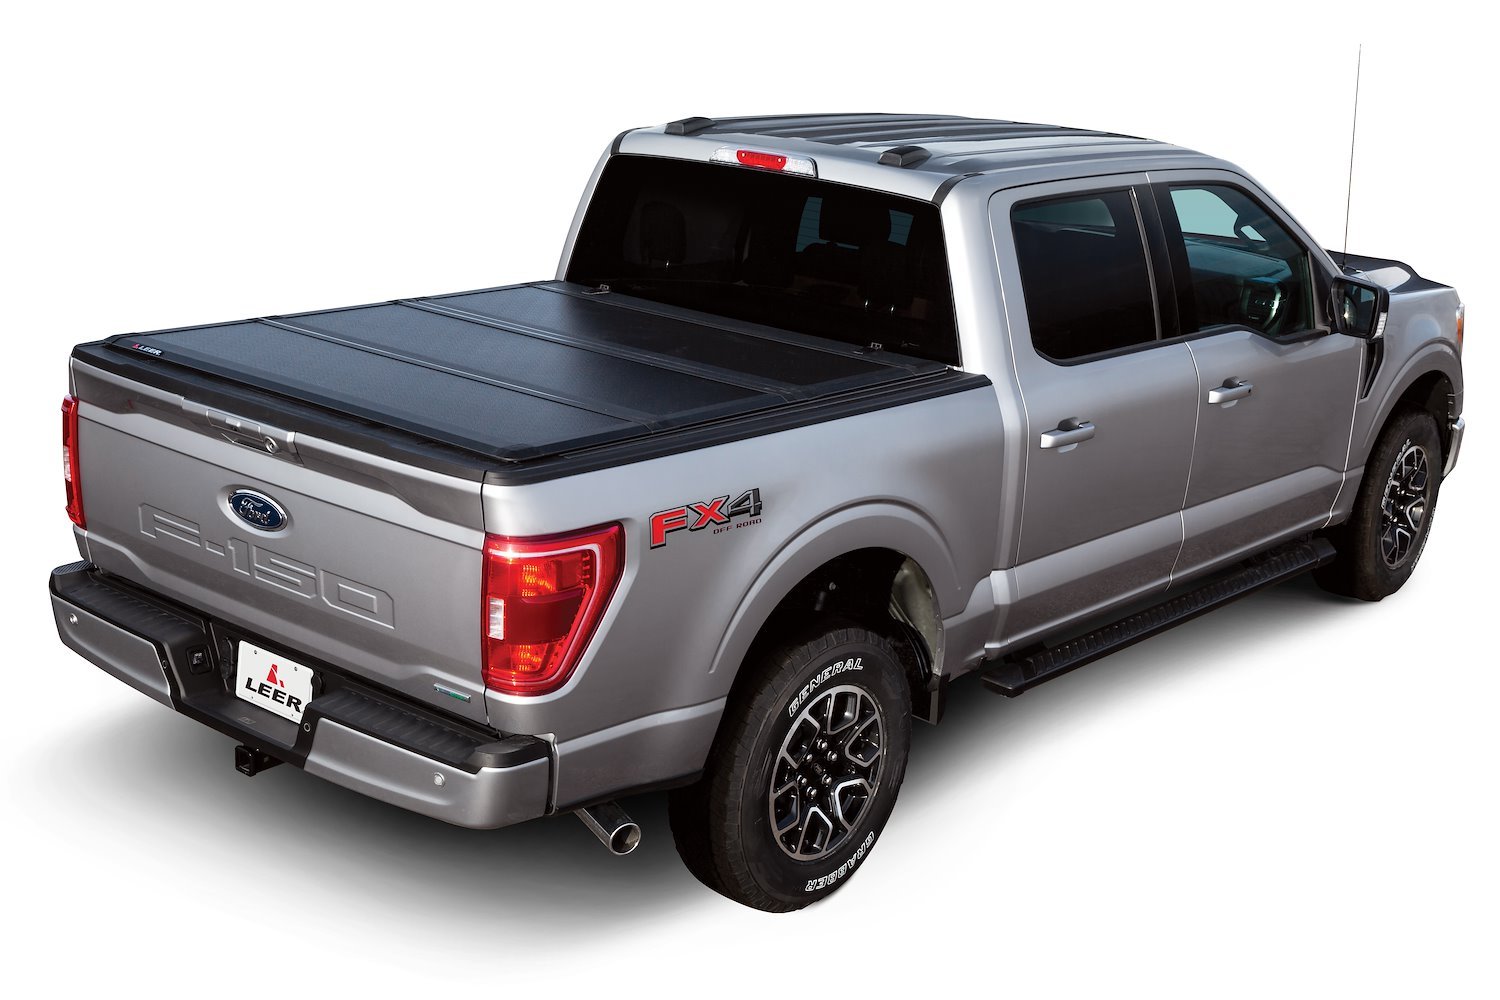 HF350M Hard Tri-Folding Tonneau Cover Fits Select Ford F-250 Super Duty, F-350 Super Duty [Bed Length: 6 ft 9 in.]